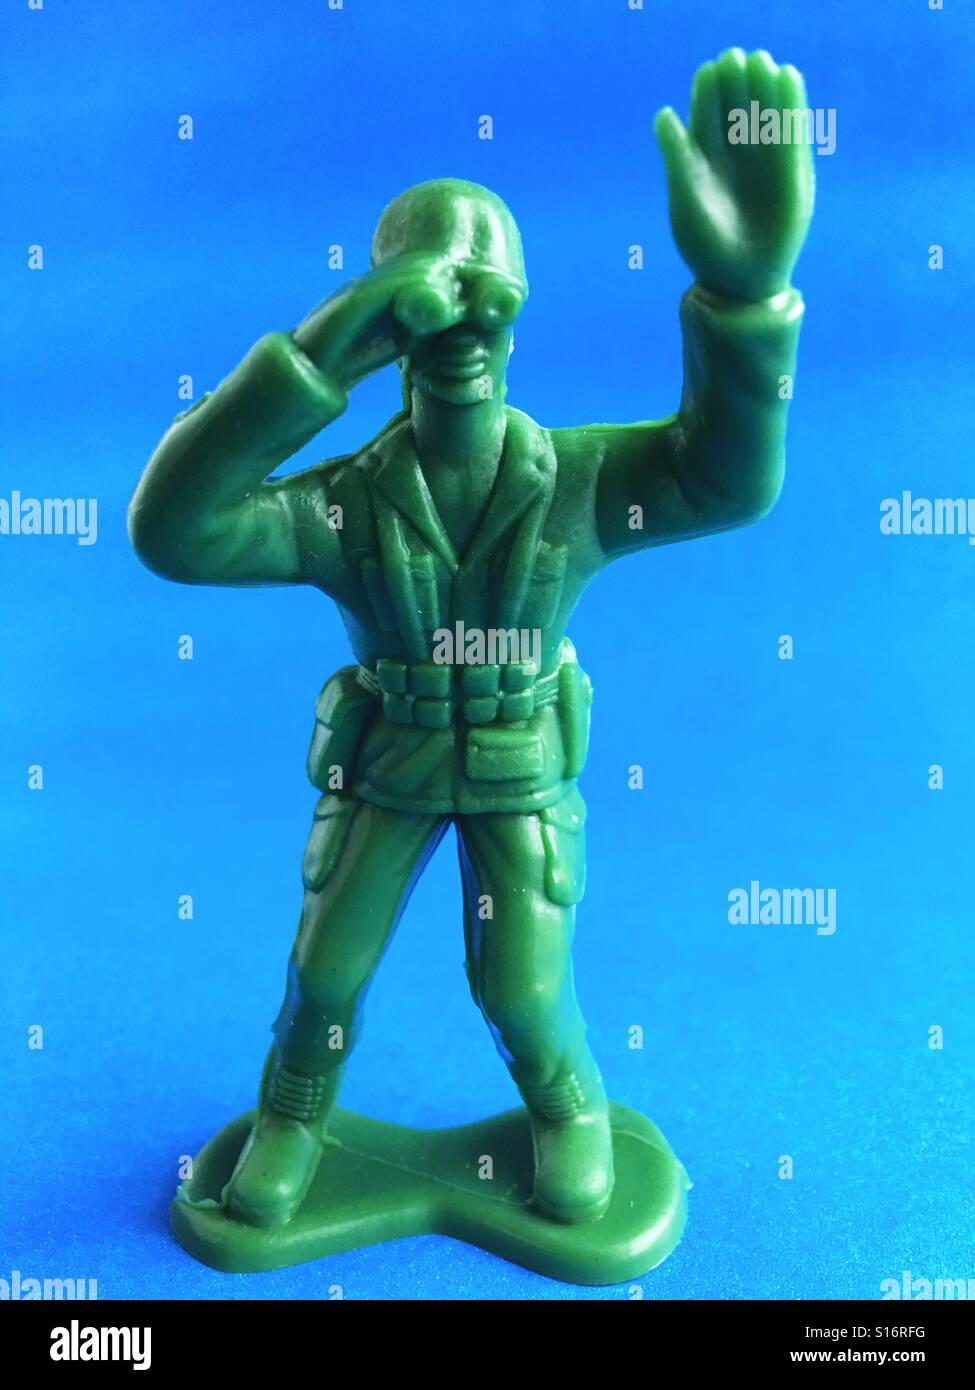 A toy soldier looking through binoculars. Stock Photo